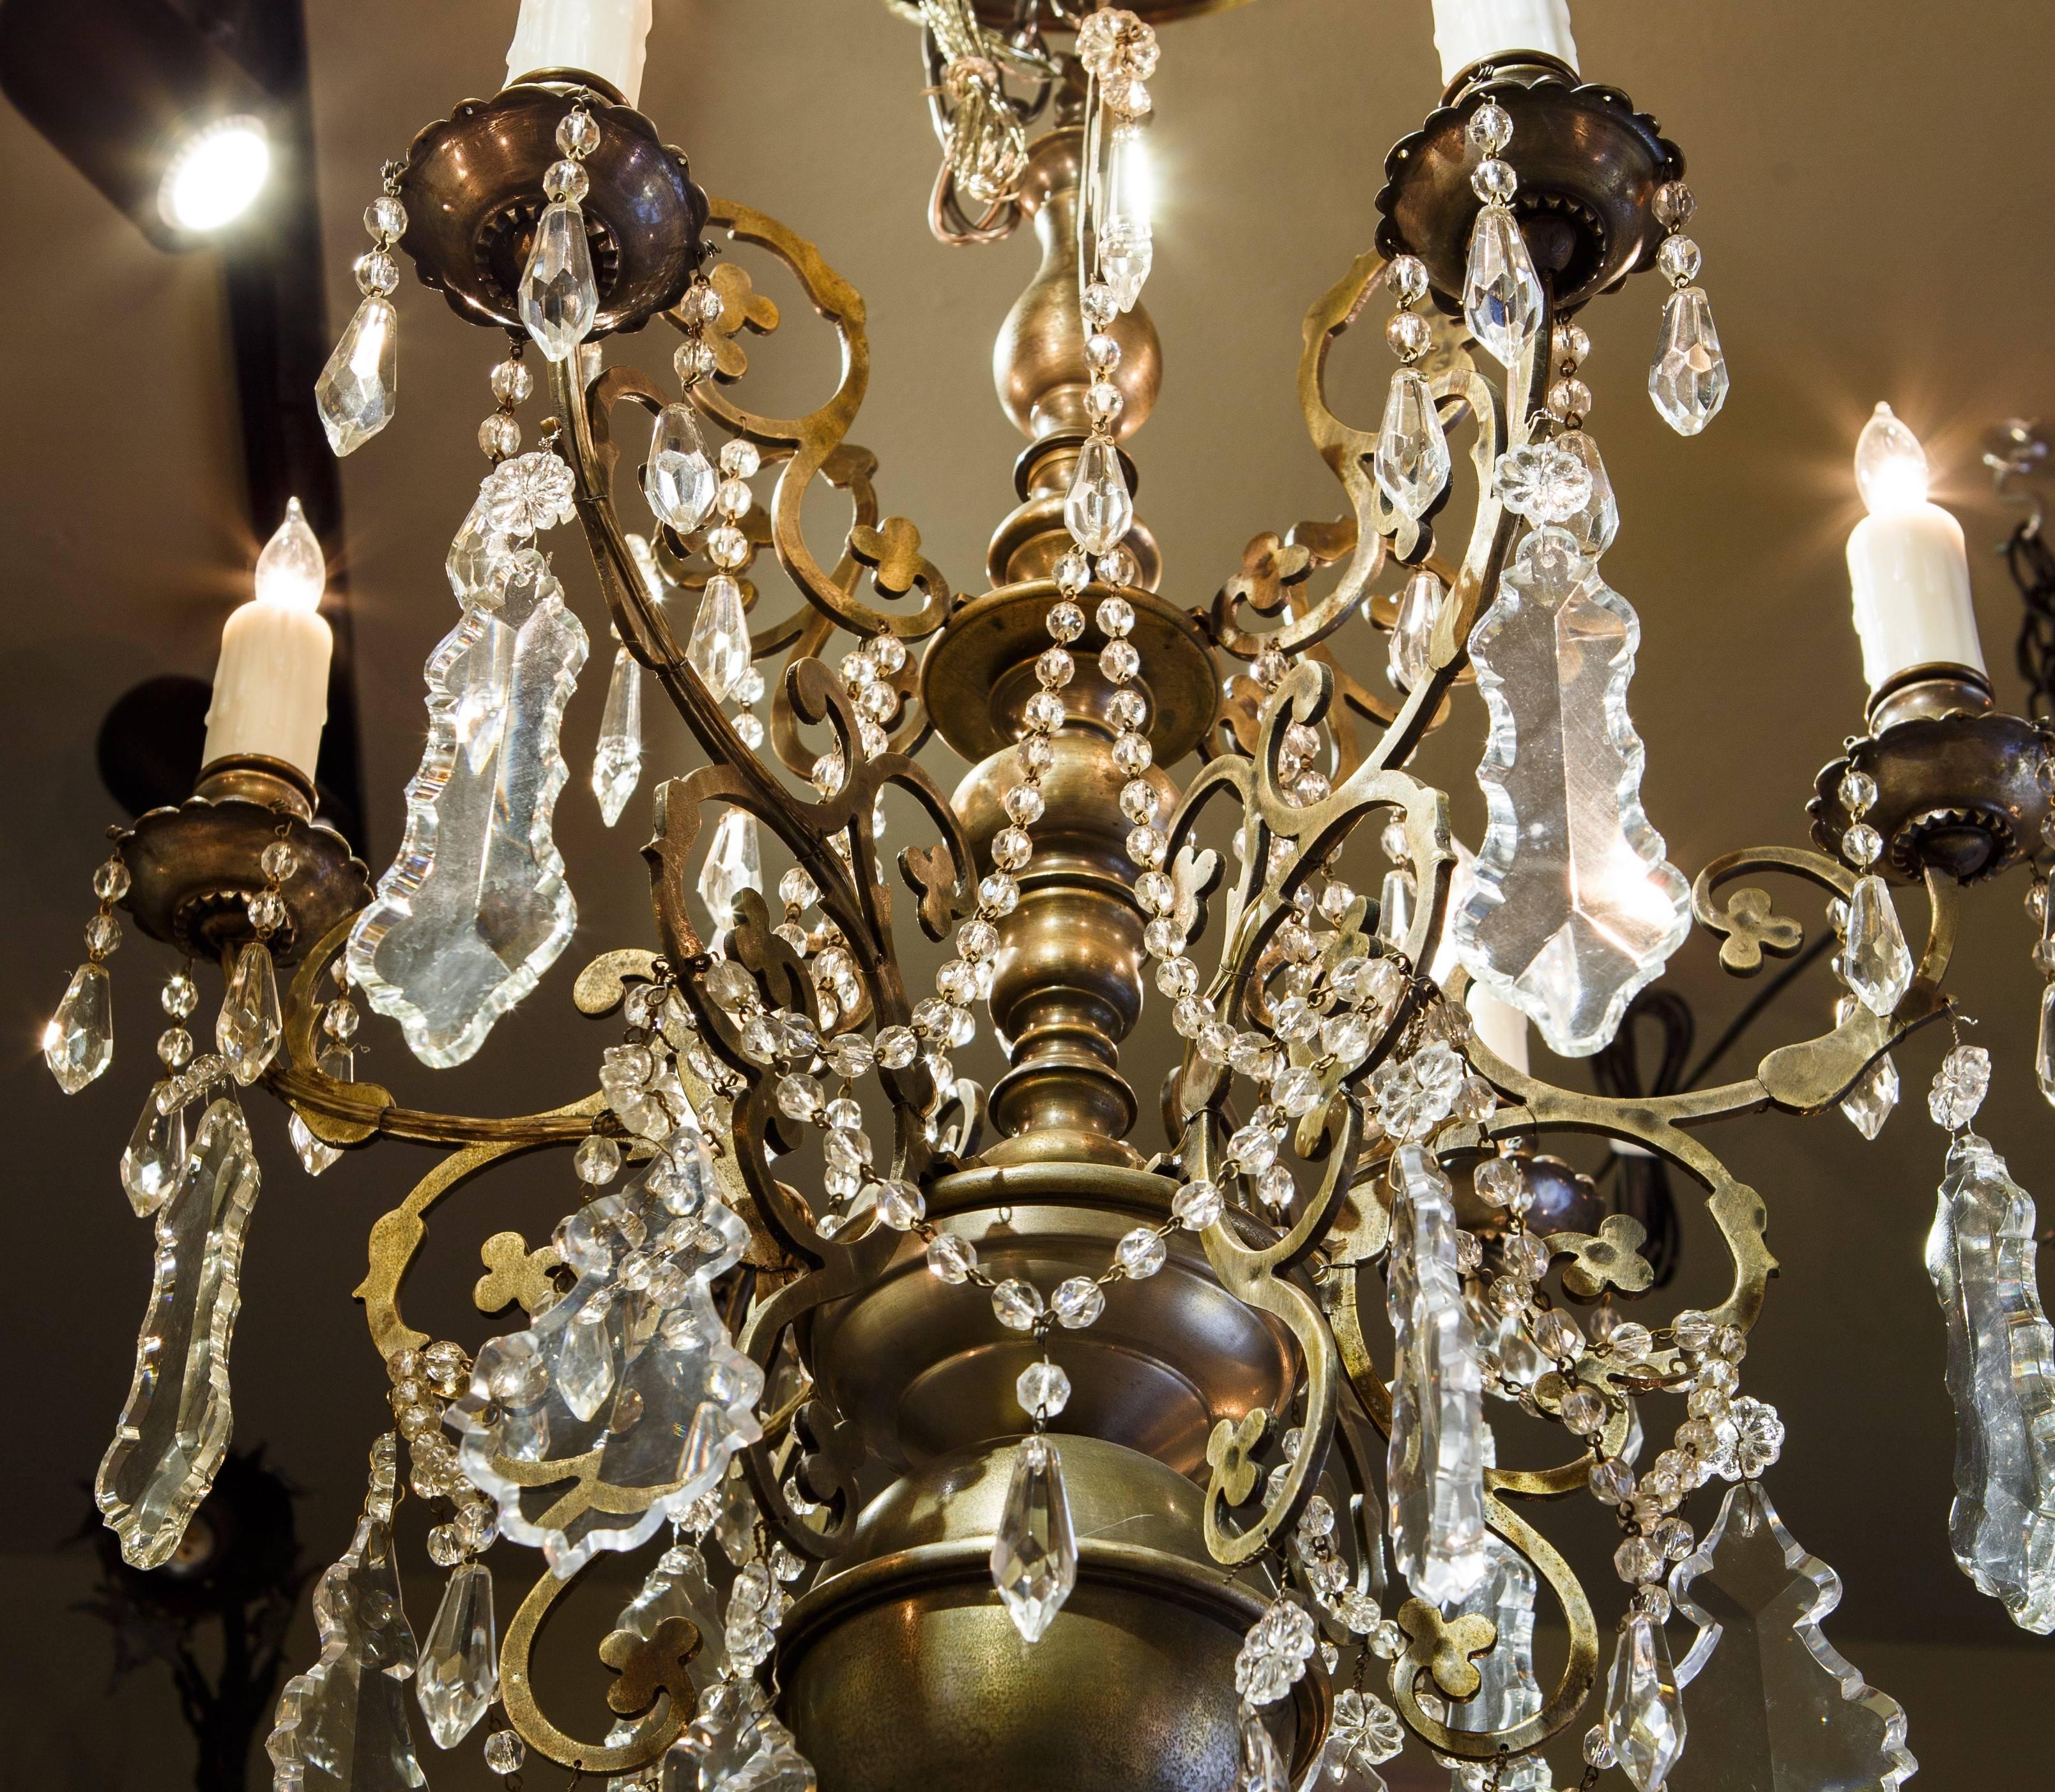 Hollywood Regency Pewter Colored Crystal Chandelier with Six Arms from Belgium, circa 1930